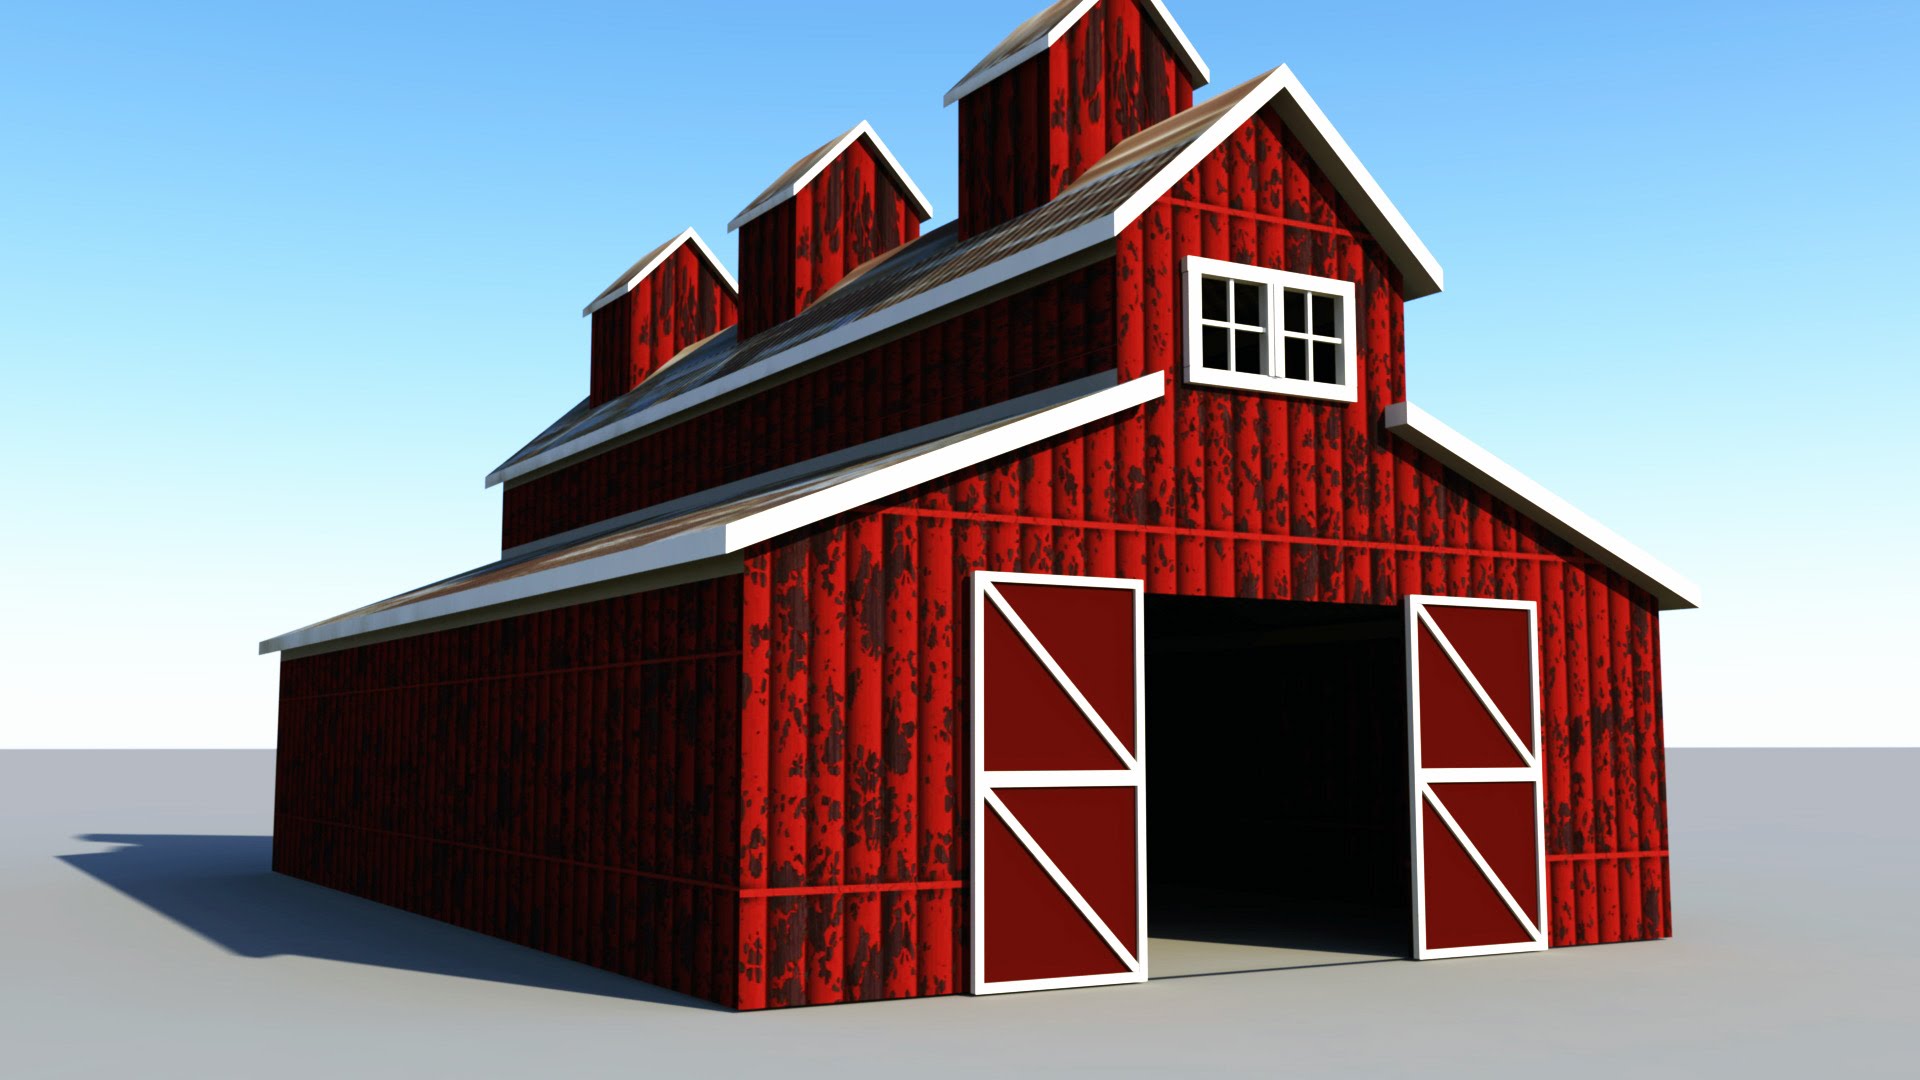 Maya 2016 tutorial : How to model a Classic red Barn - YouTube